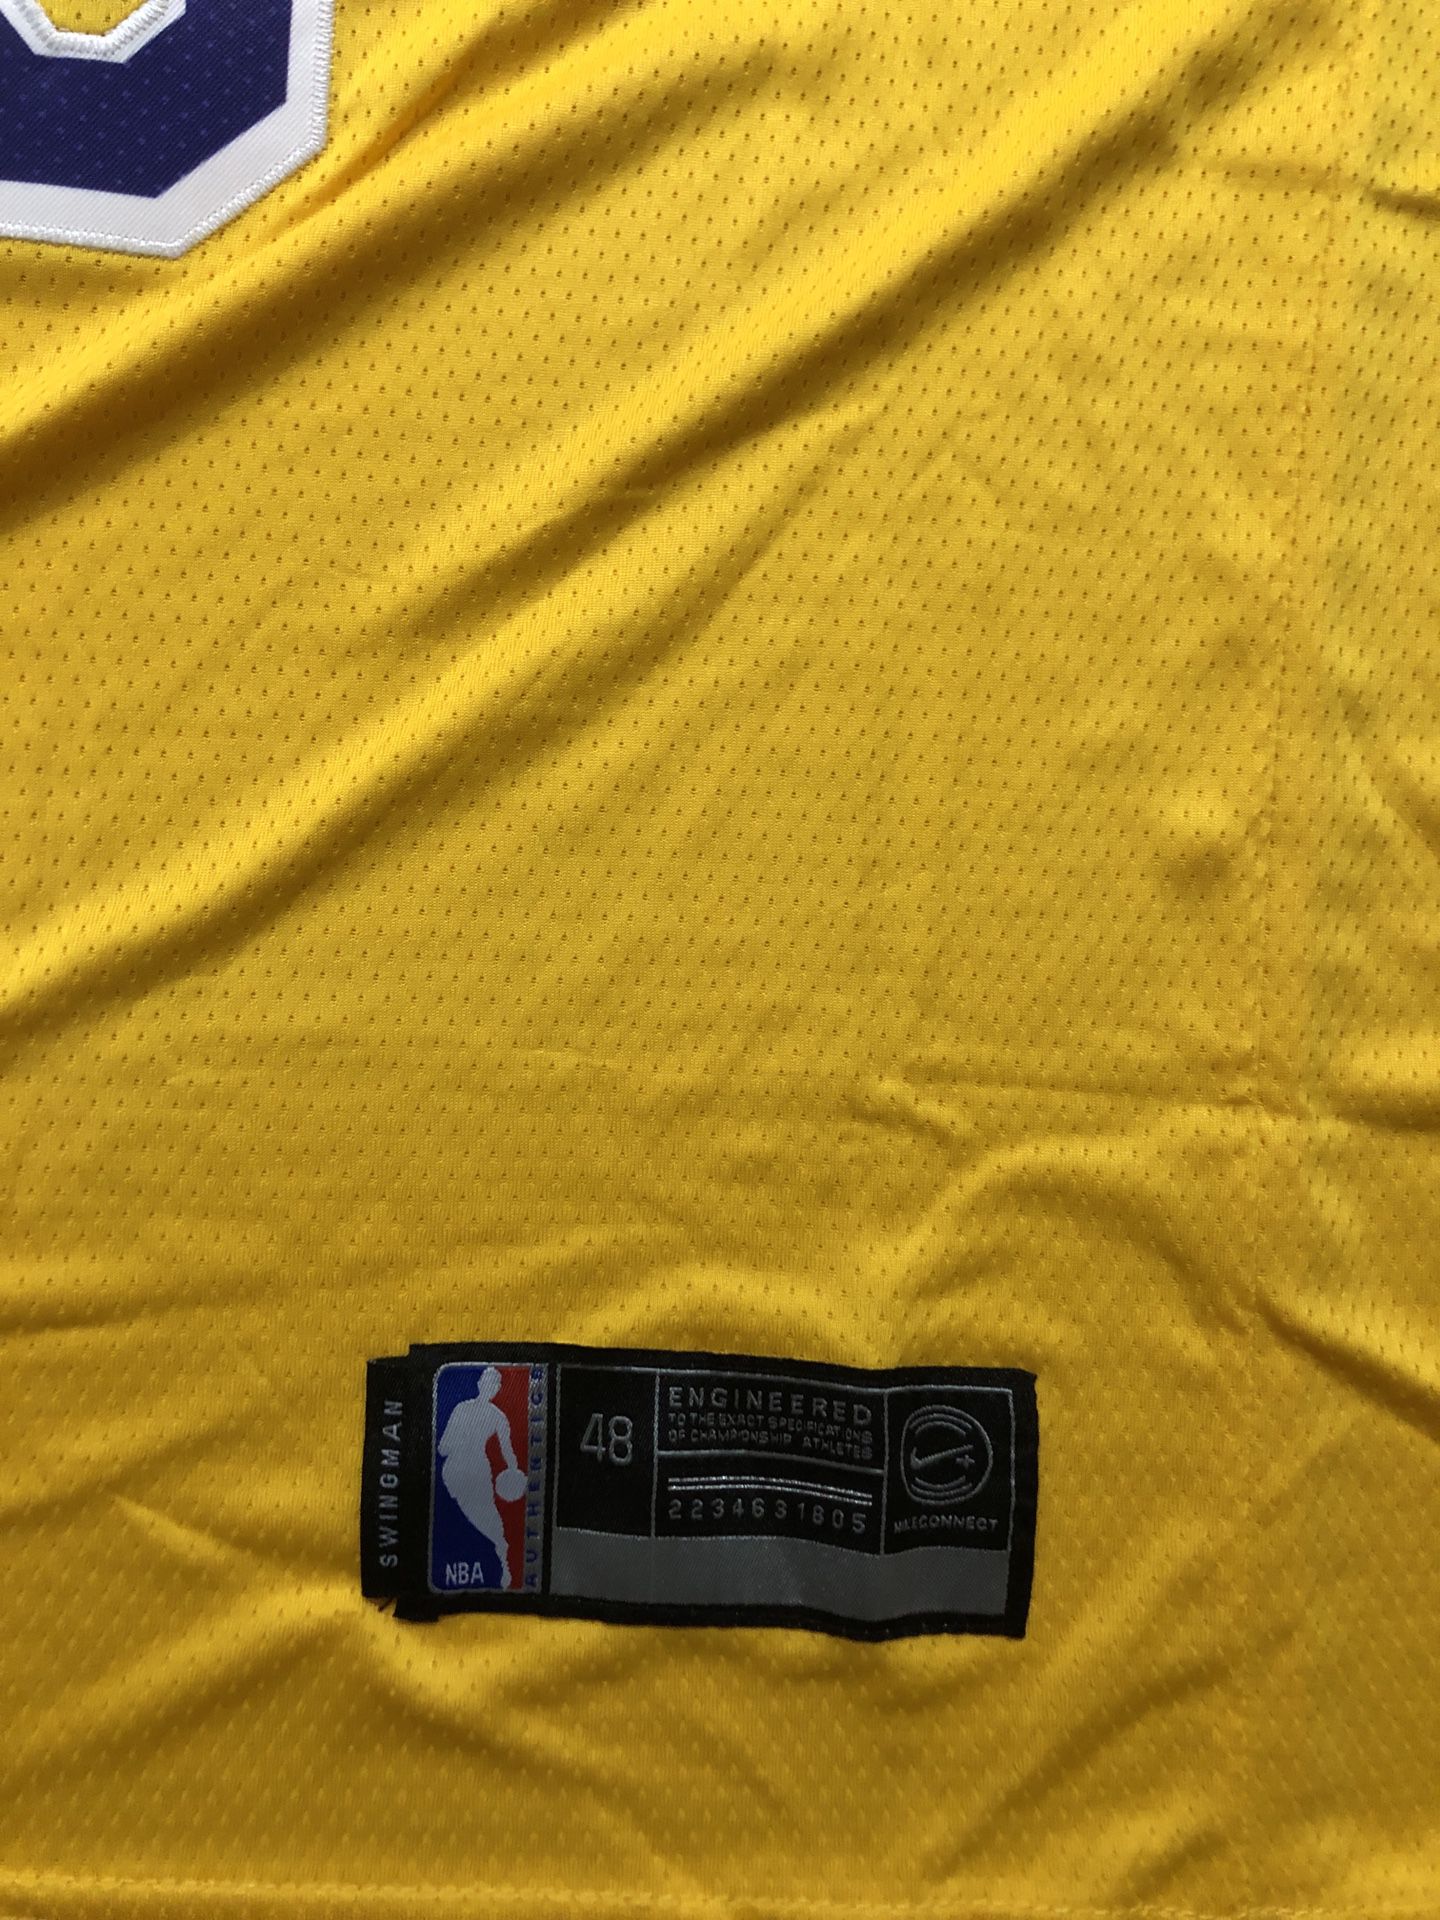 LeBron James Lakers Association Authentic Jersey for Sale in Hawthorne, CA  - OfferUp